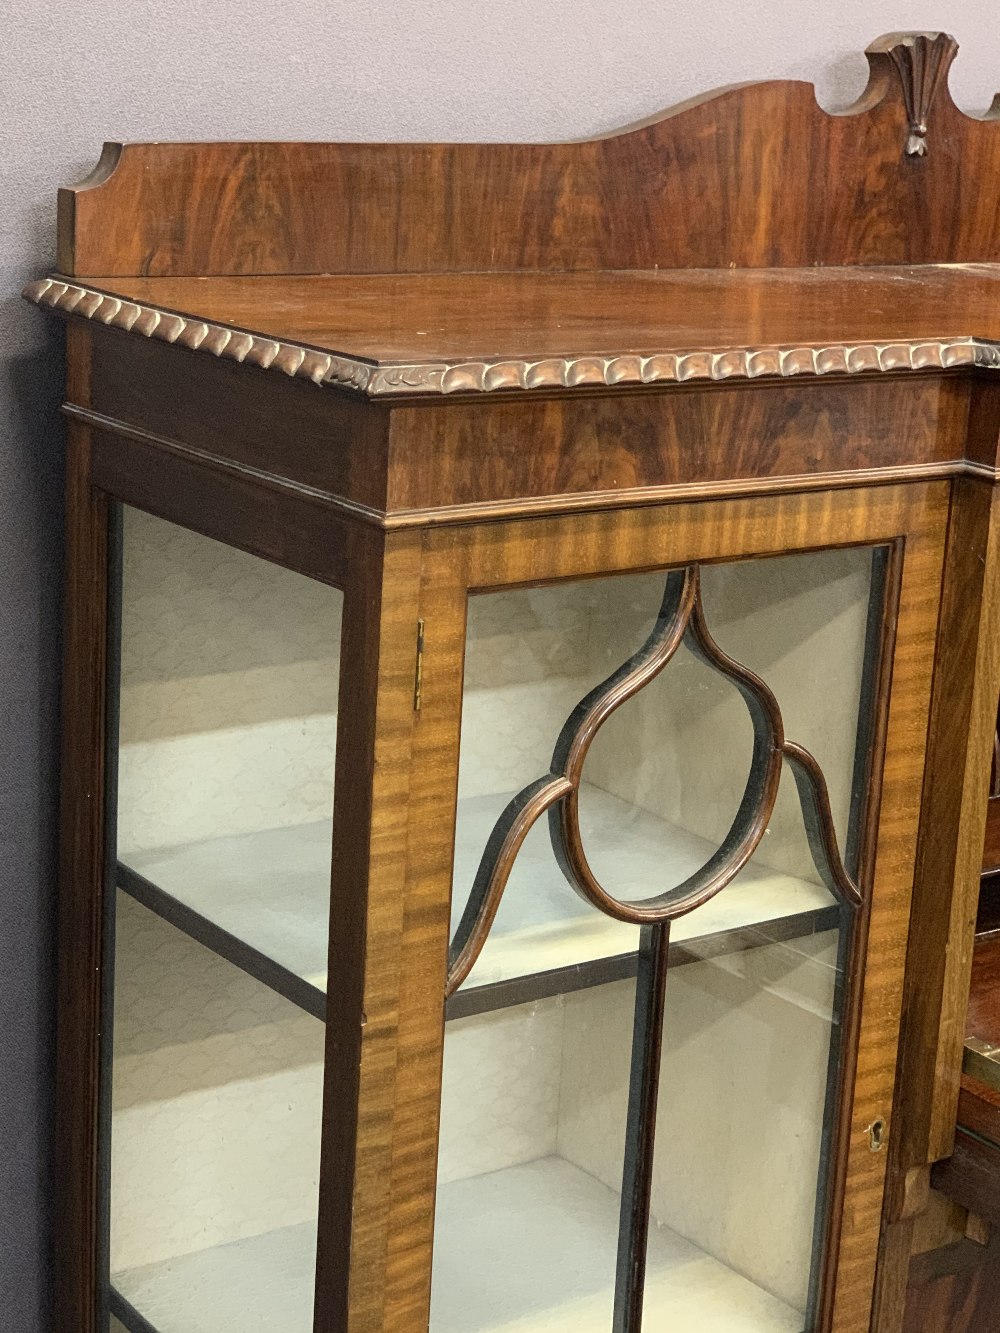 QUALITY MAHOGANY 'SIDE BY SIDE' CHINA DISPLAY CABINET - with central bureau and lower drawers, - Image 2 of 4